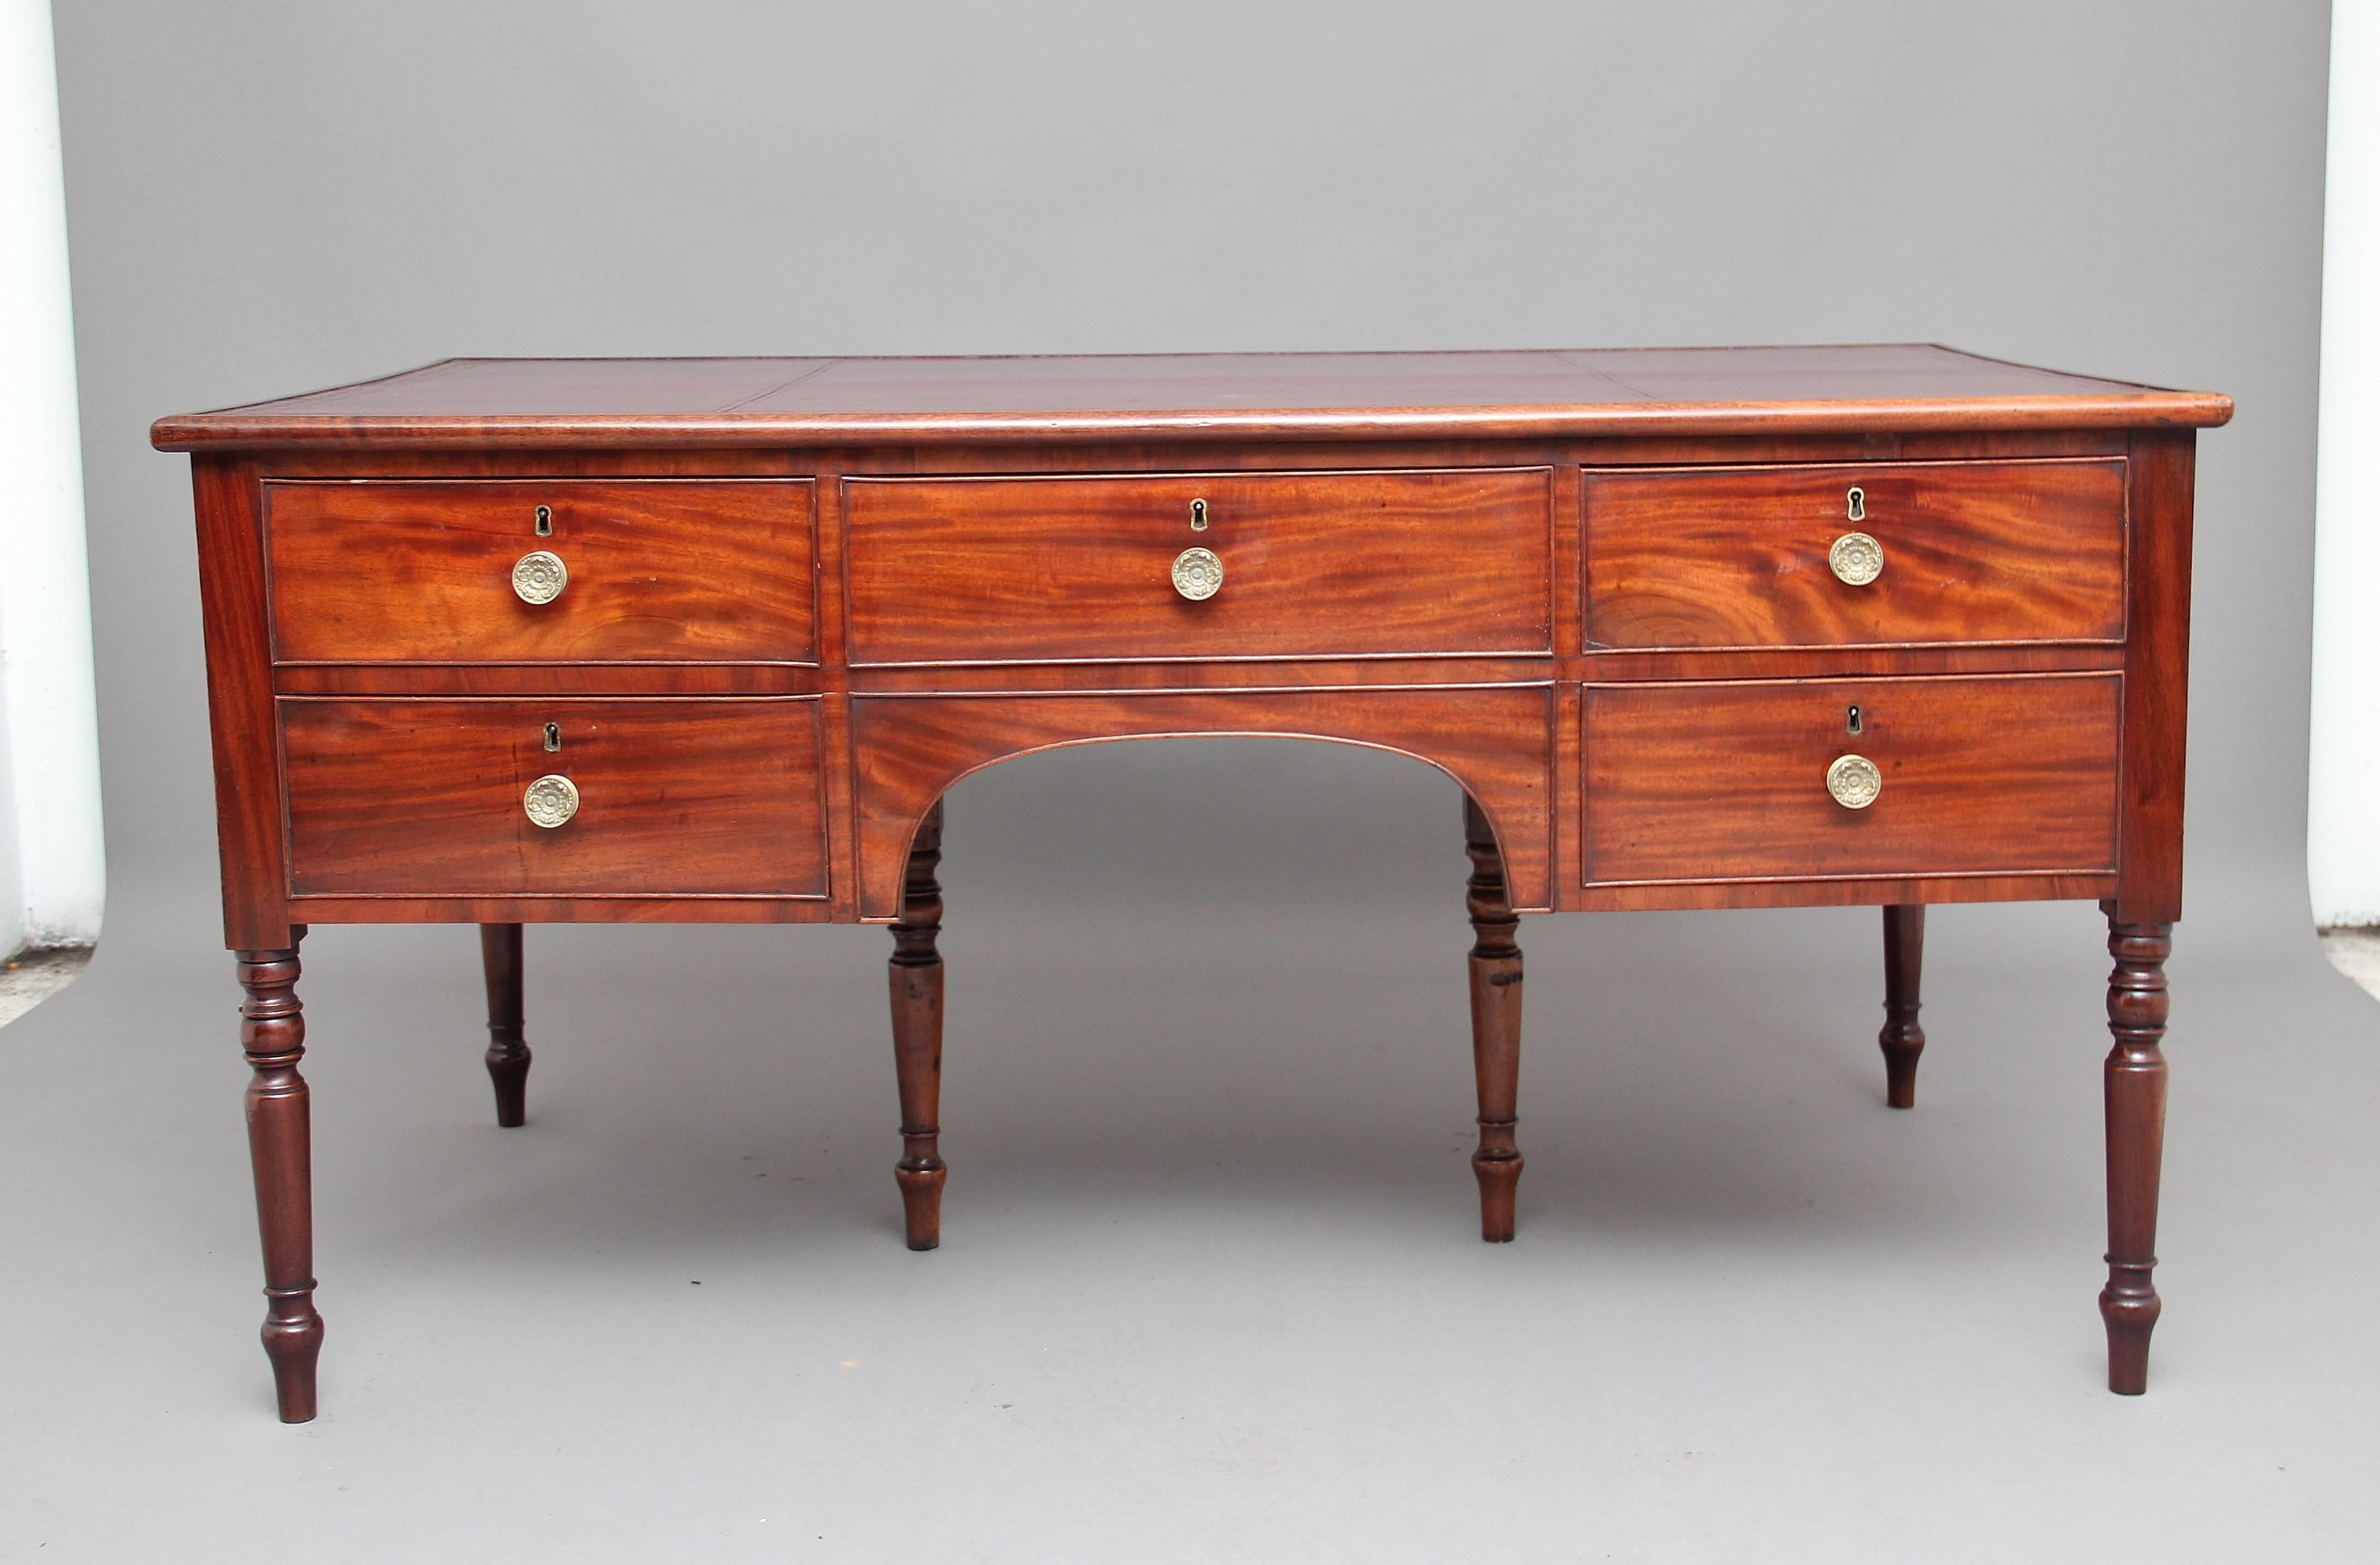 19th century mahogany partners writing desk, with a tooled burgundy leather inset top, the desk having an arrangement of nine drawers, five at the front and four at the back, each drawer having brass turned knob handles, both sides of the desk